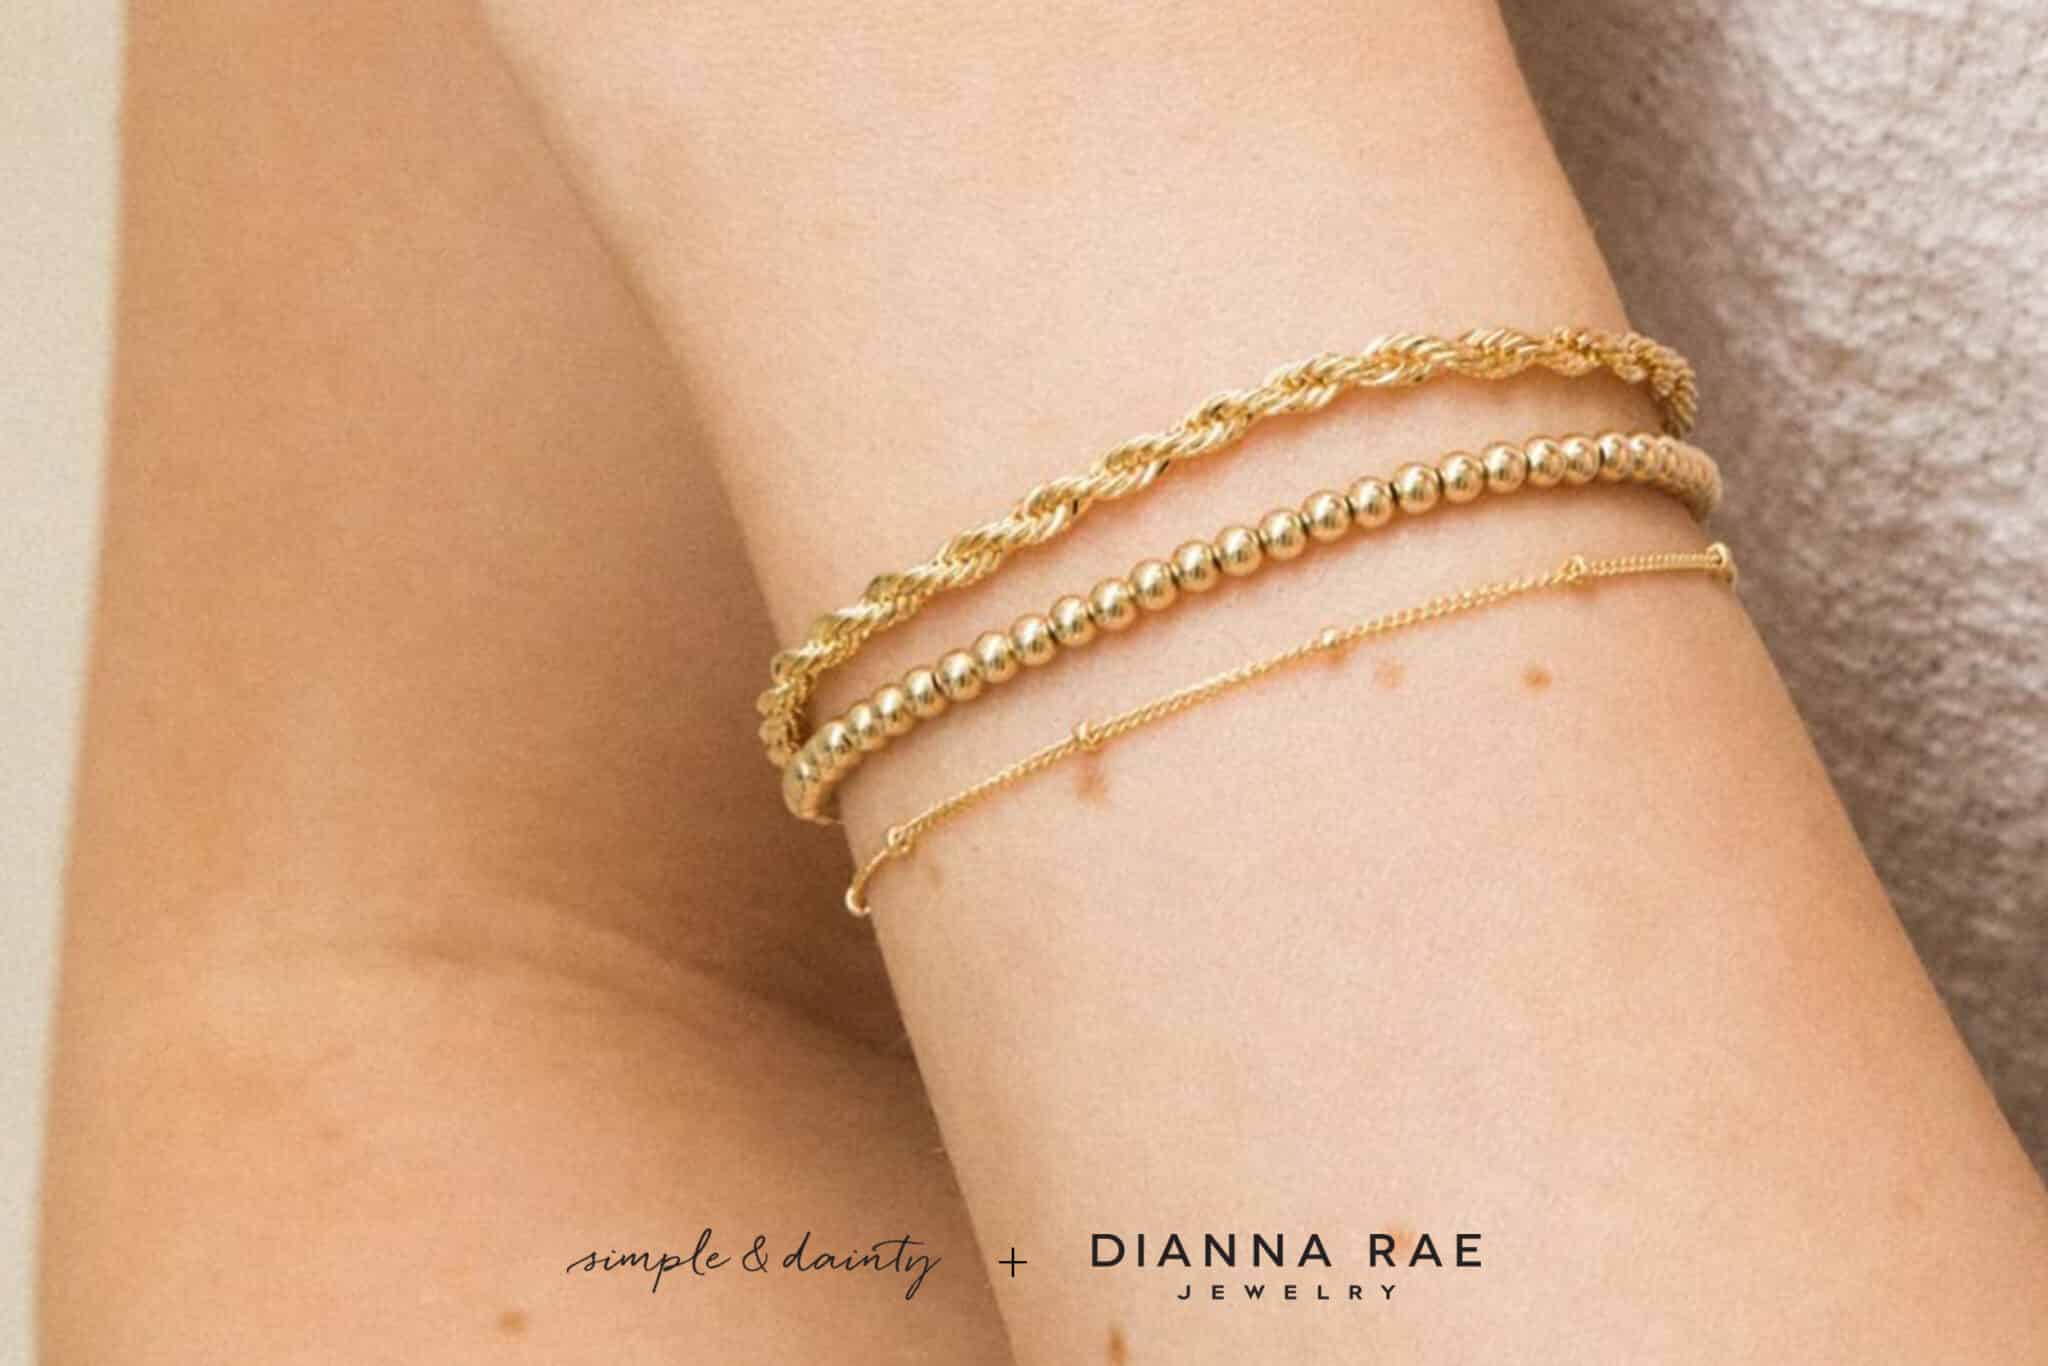 Simple & Dainty 14kt Gold Filled 4mm Stretch Bead Bracelet - Dianna Rae  Jewelry